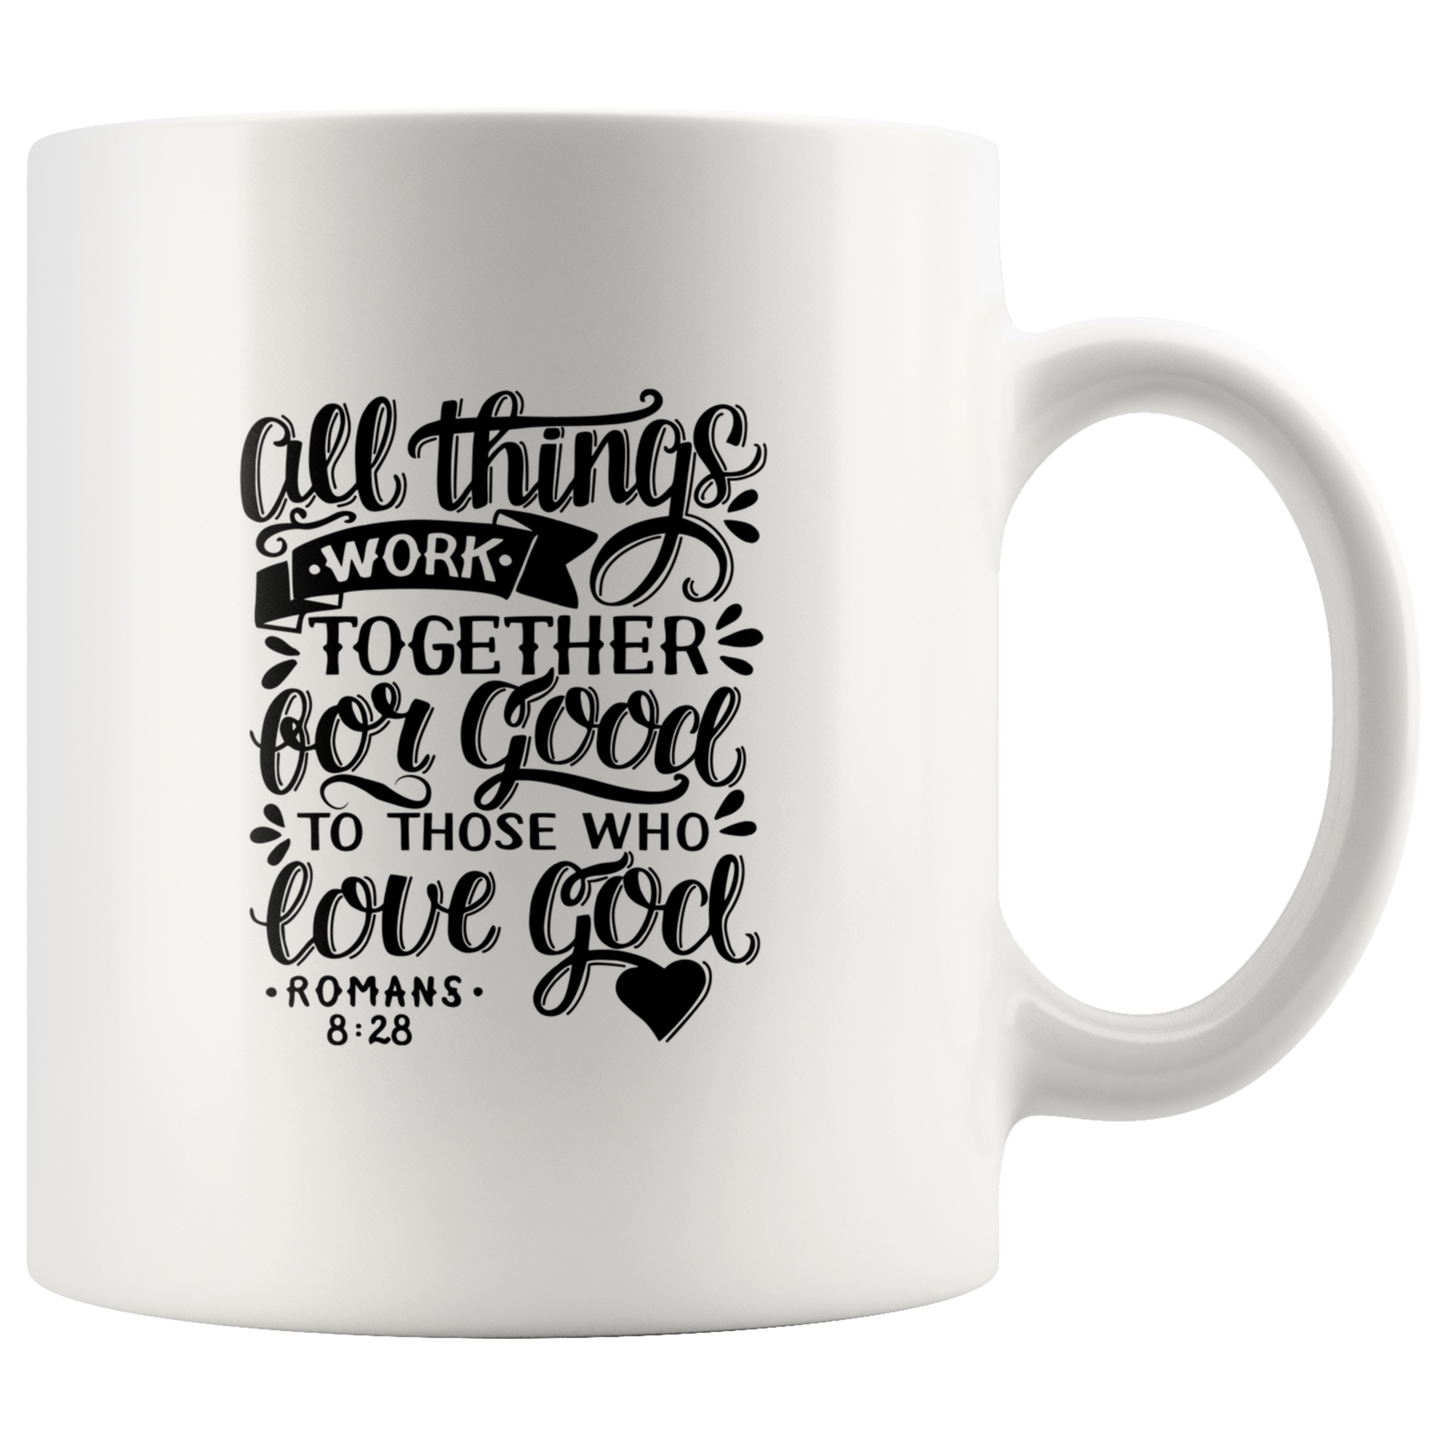 All Things Work Together For Good To Those Who Love God, Romans 8:28 - Accent Mug white